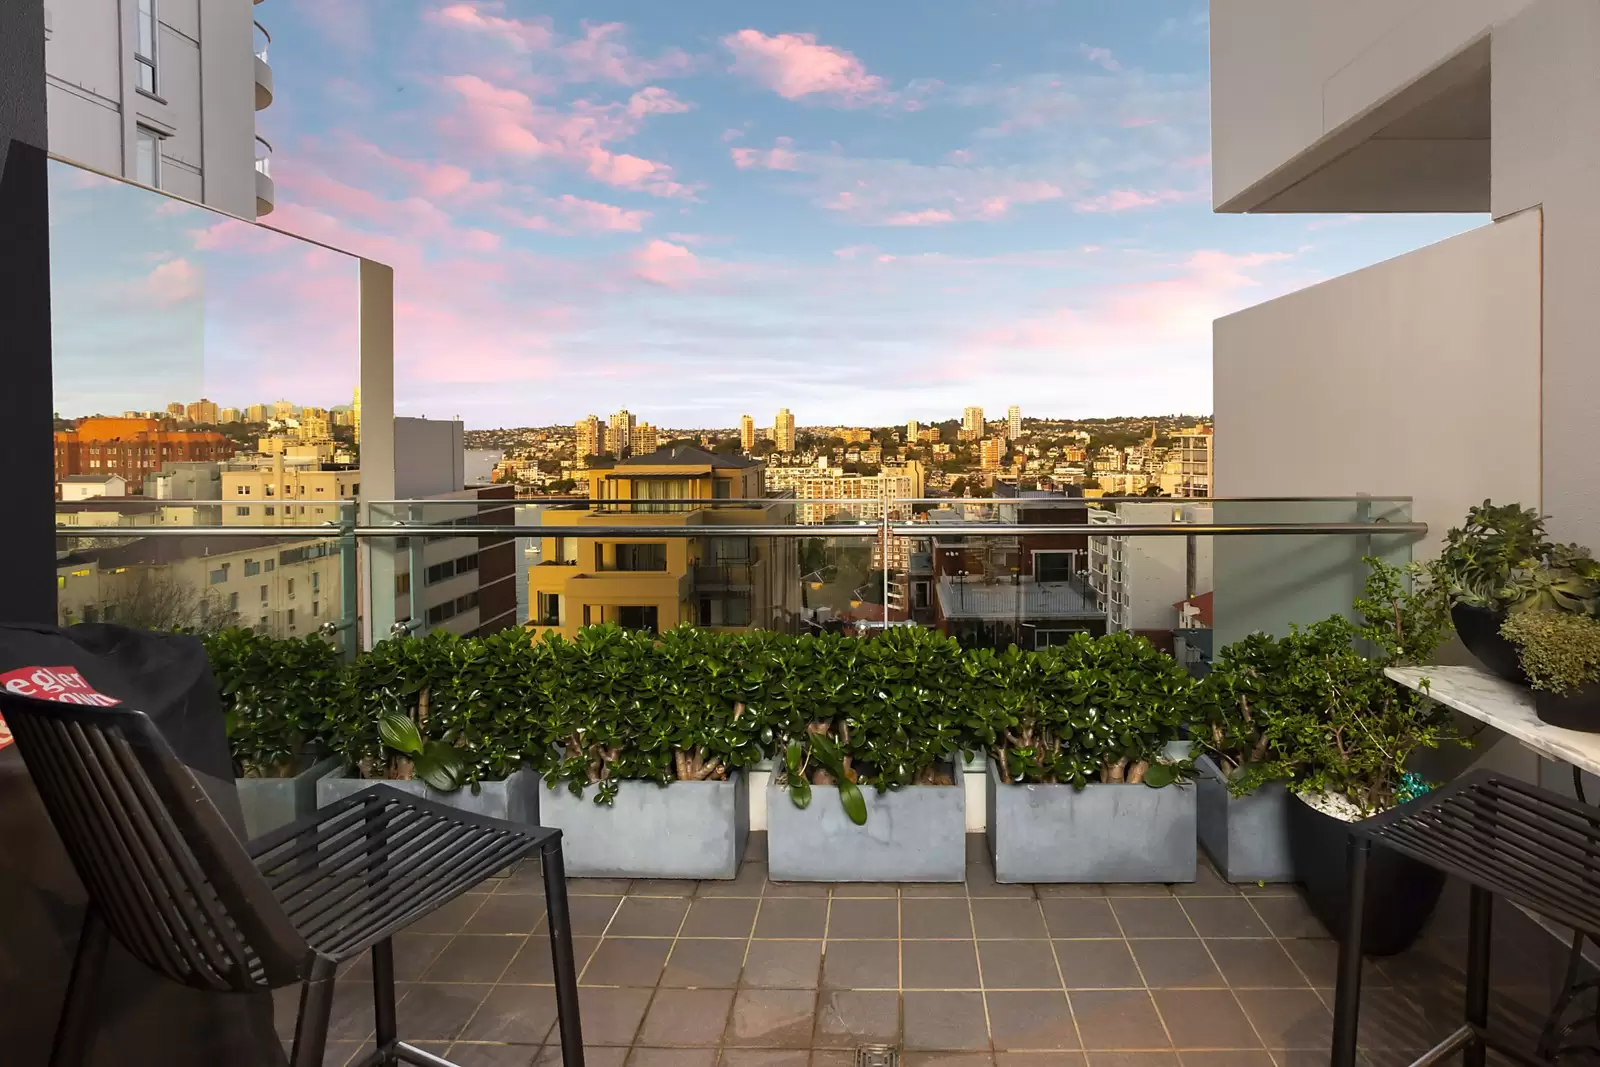 Photo #11: 906/81 Macleay Street, Potts Point - Sold by Sydney Sotheby's International Realty